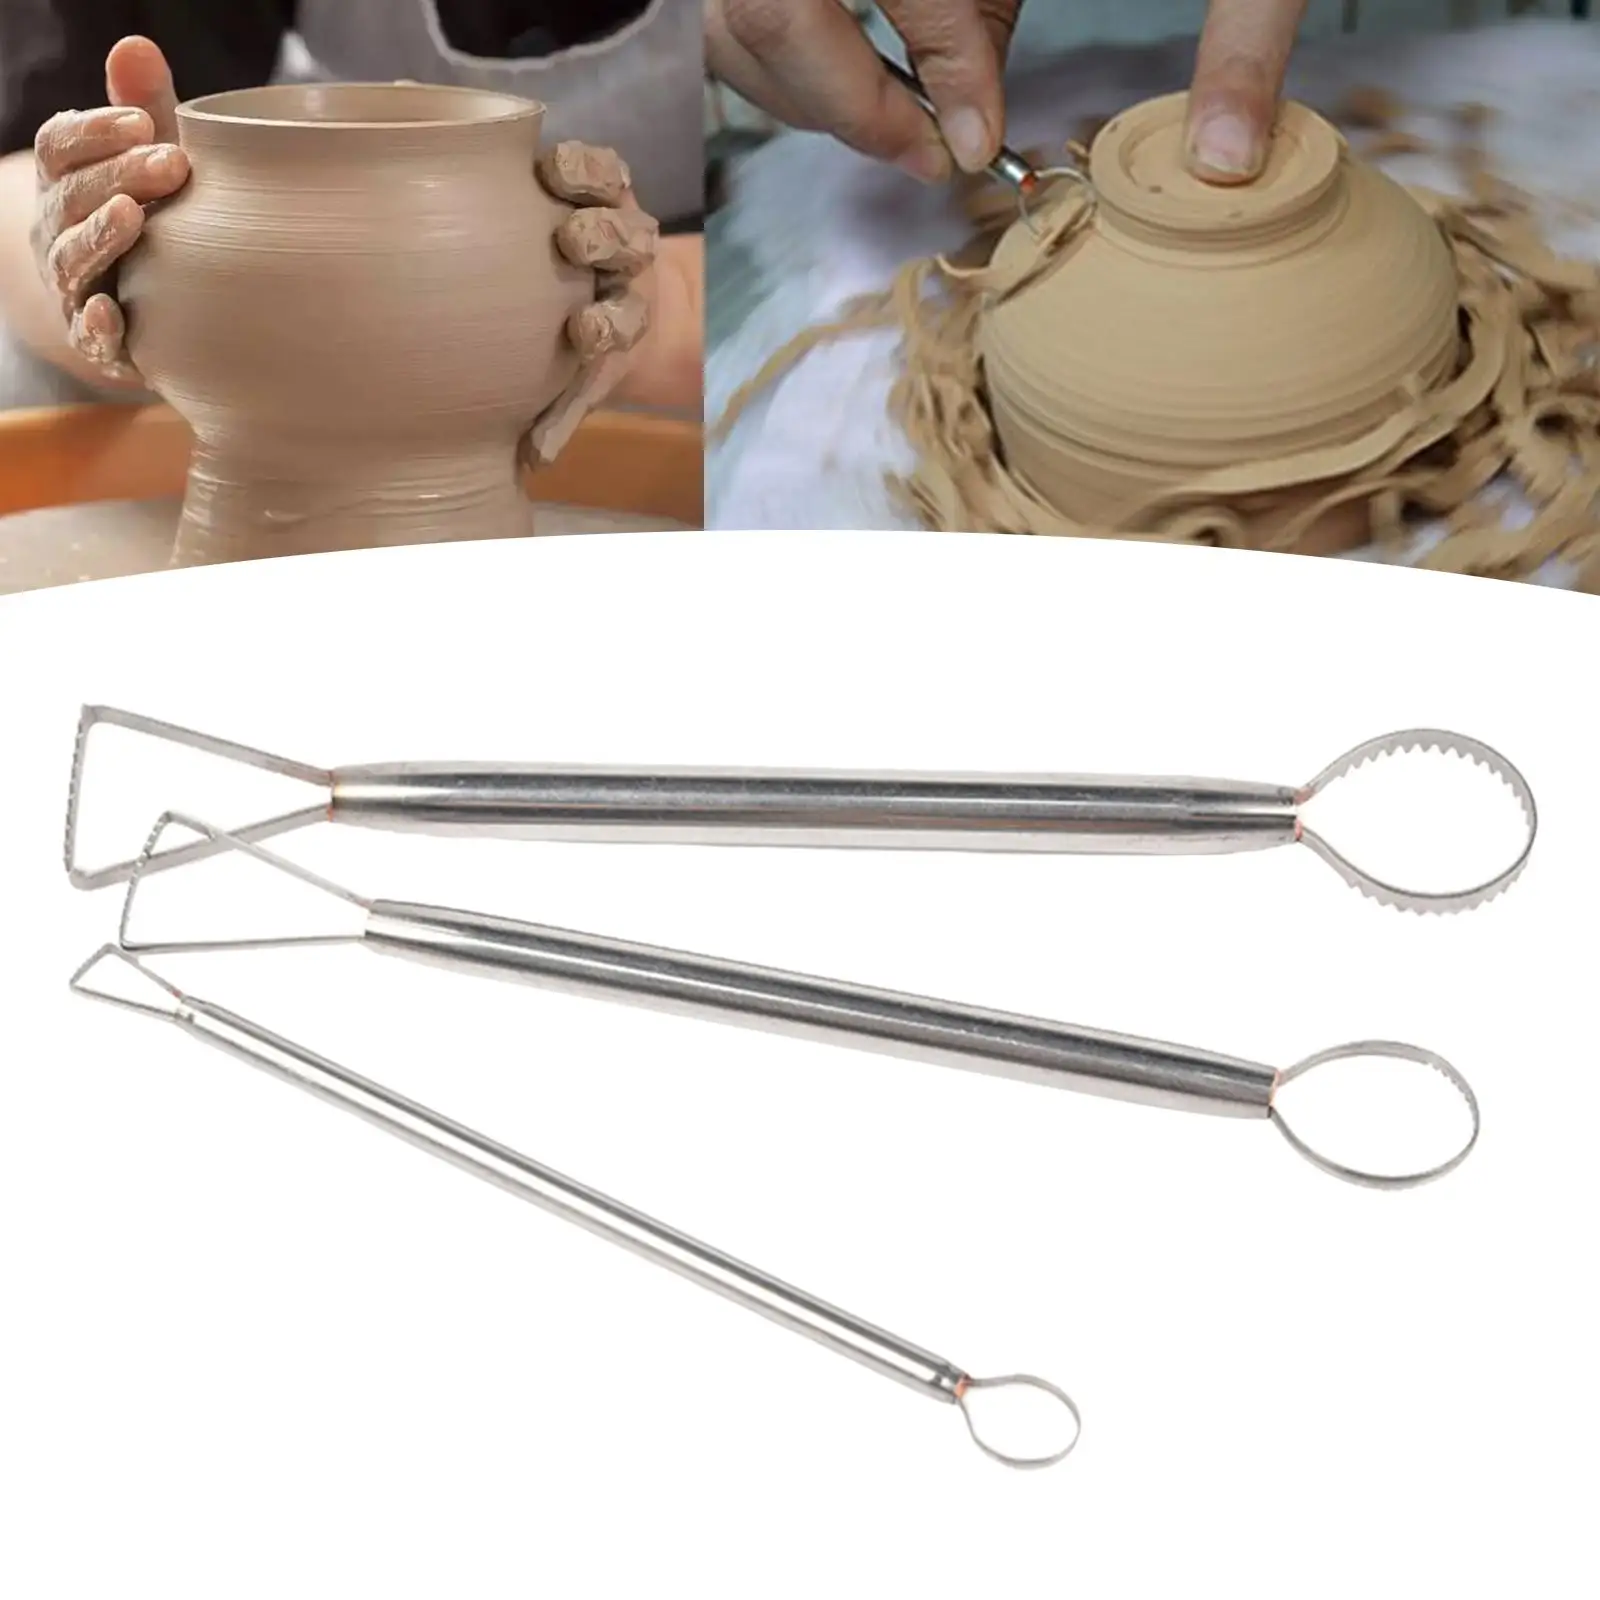 Pottery Clay Sculpting Tools Double Ended Polymer Clay Sculpting Tools Set for Repair